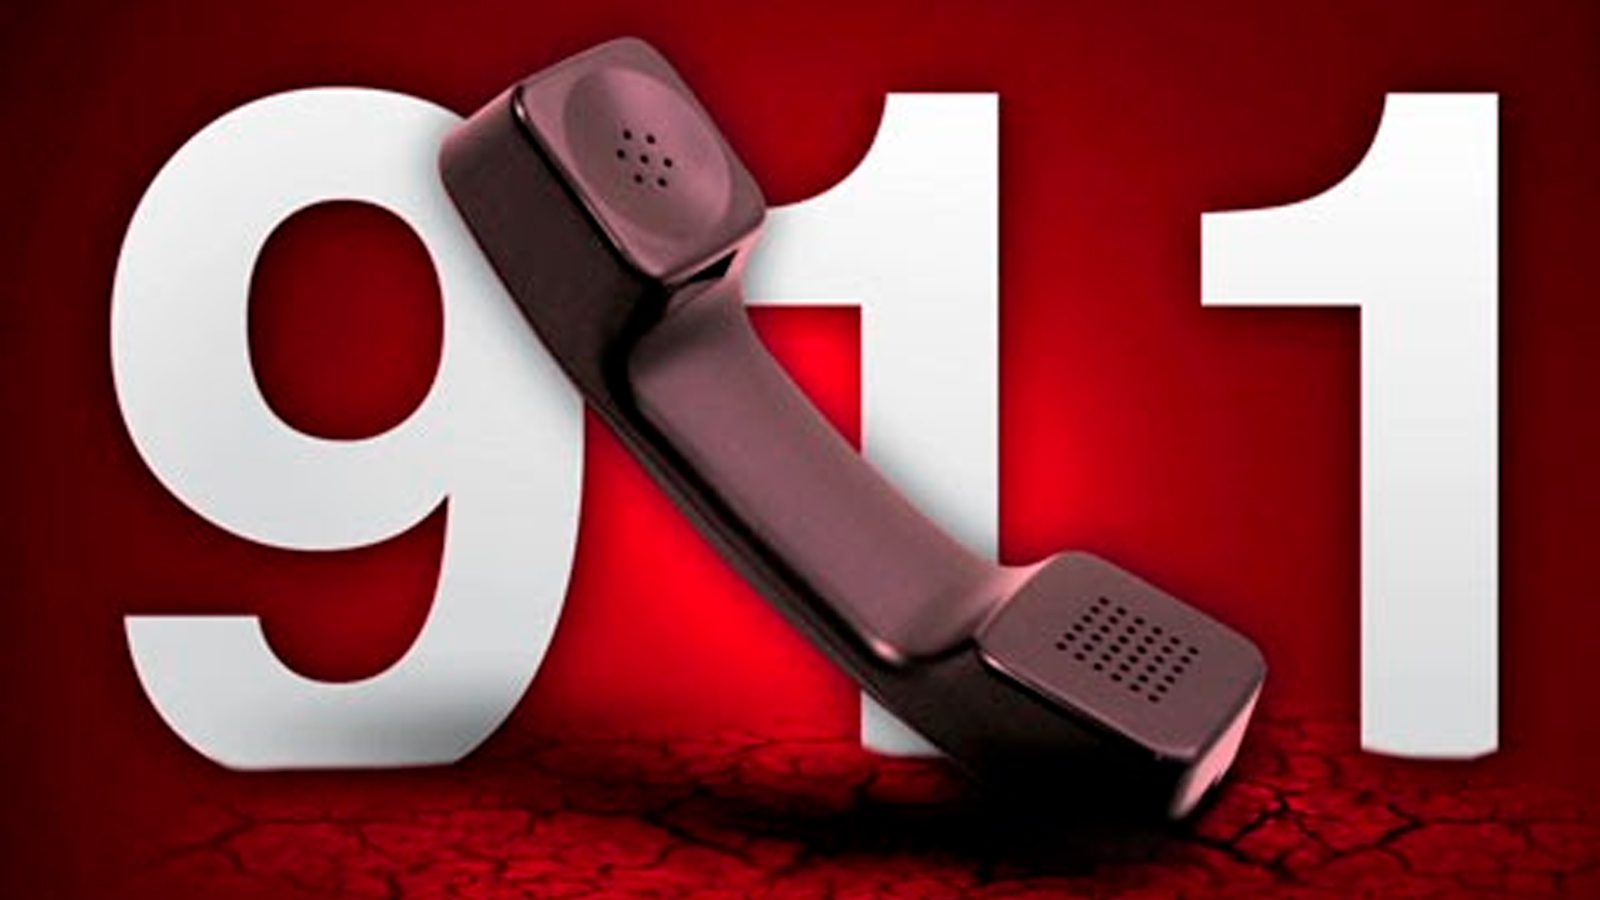 The power of 911: how technology can save lives